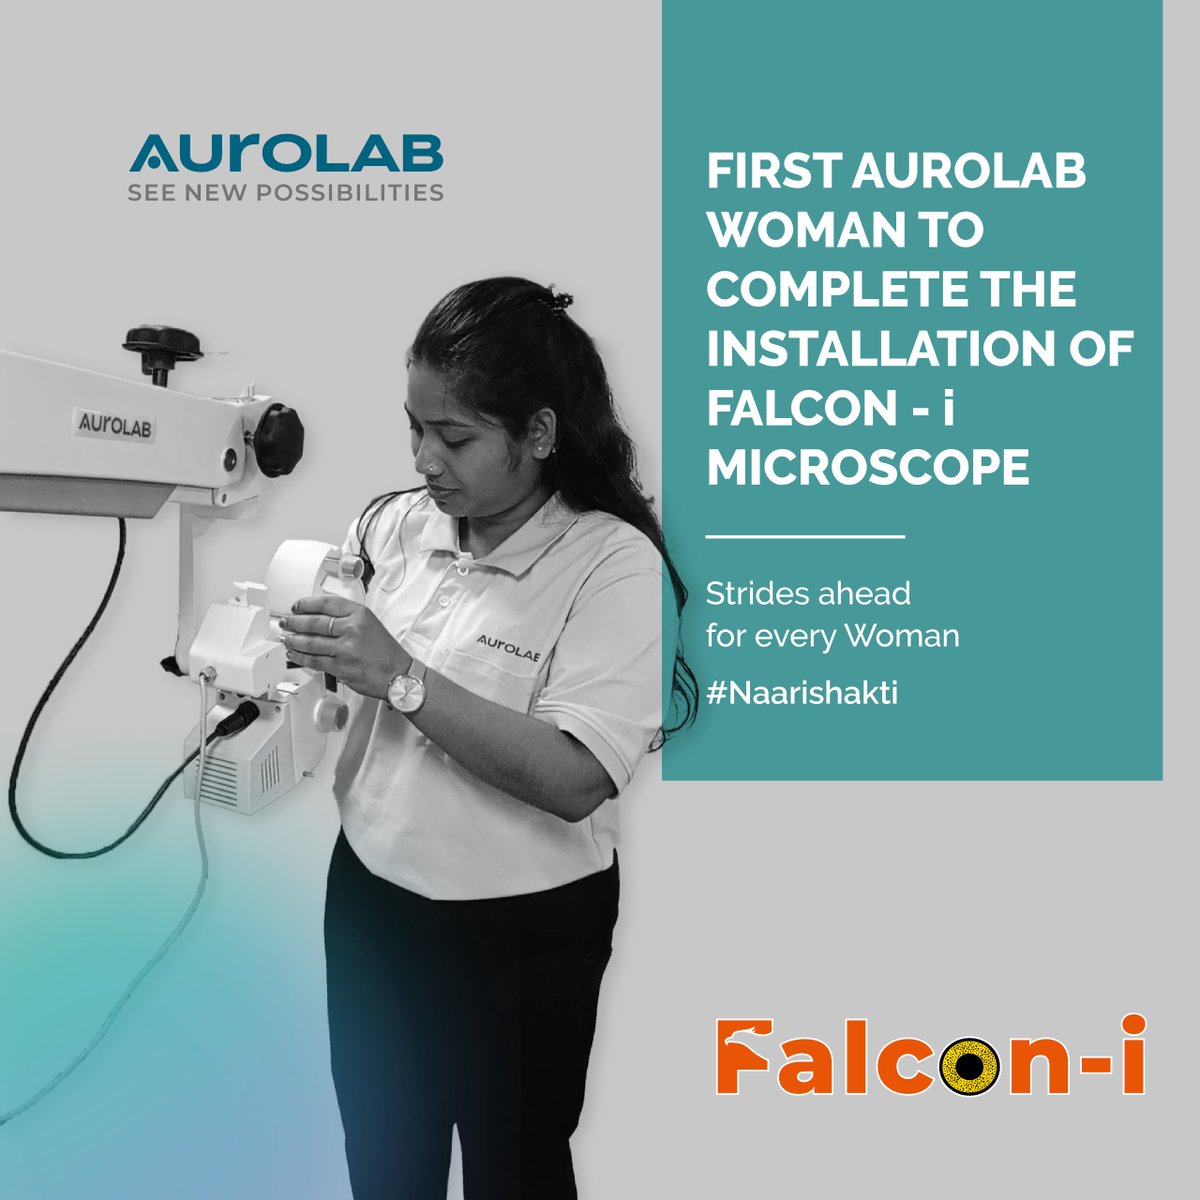 At Aurolab we take great pride in the fact that 80% of our workforce is women led. From the production floor to marketing our finest solutions. 

#Aurolab #SeeNewPossibilities #WeAreAurolab #NaariShakti #powerofwomen #Falconi #WomenEmpowerments